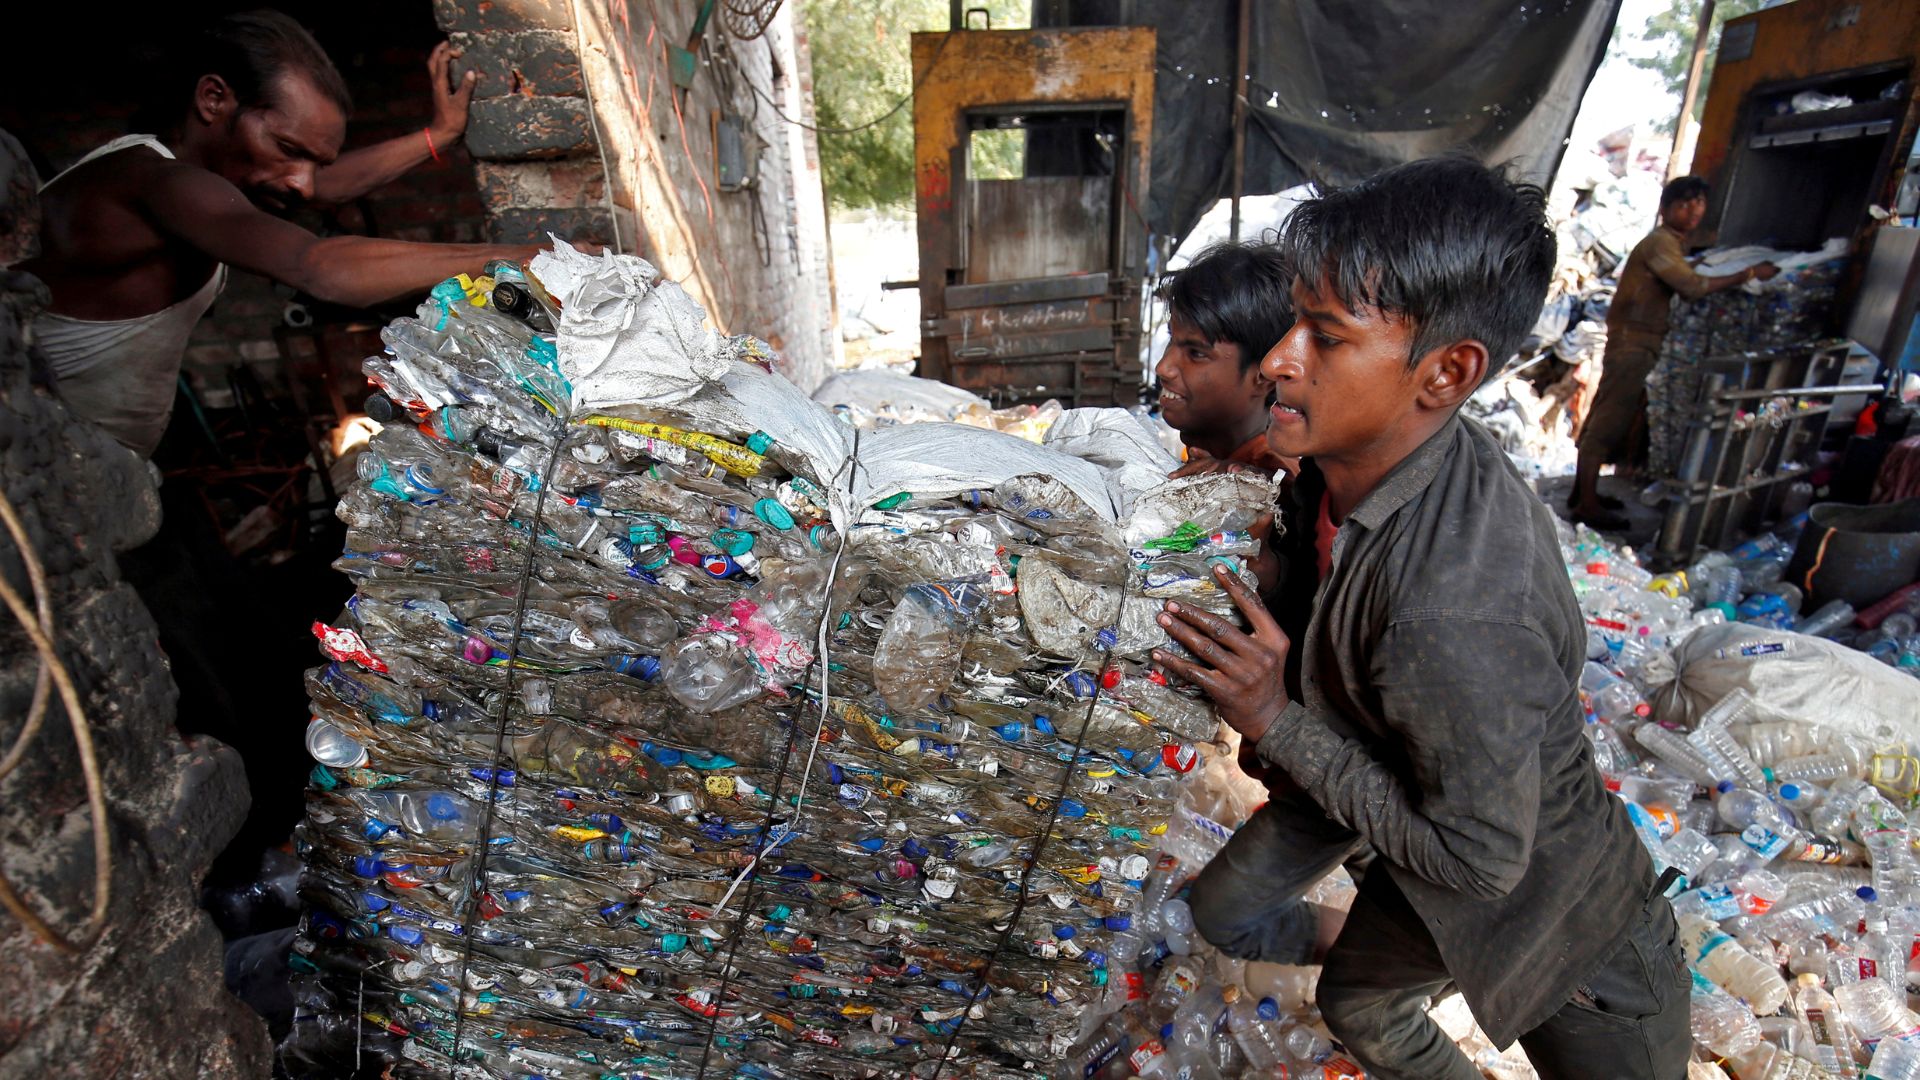 Workers push a bundle of crushed plastic bottles at a recycling factory in Ahmedabad, India, November 22, 2018. REUTERS/Amit Dave/File Photo